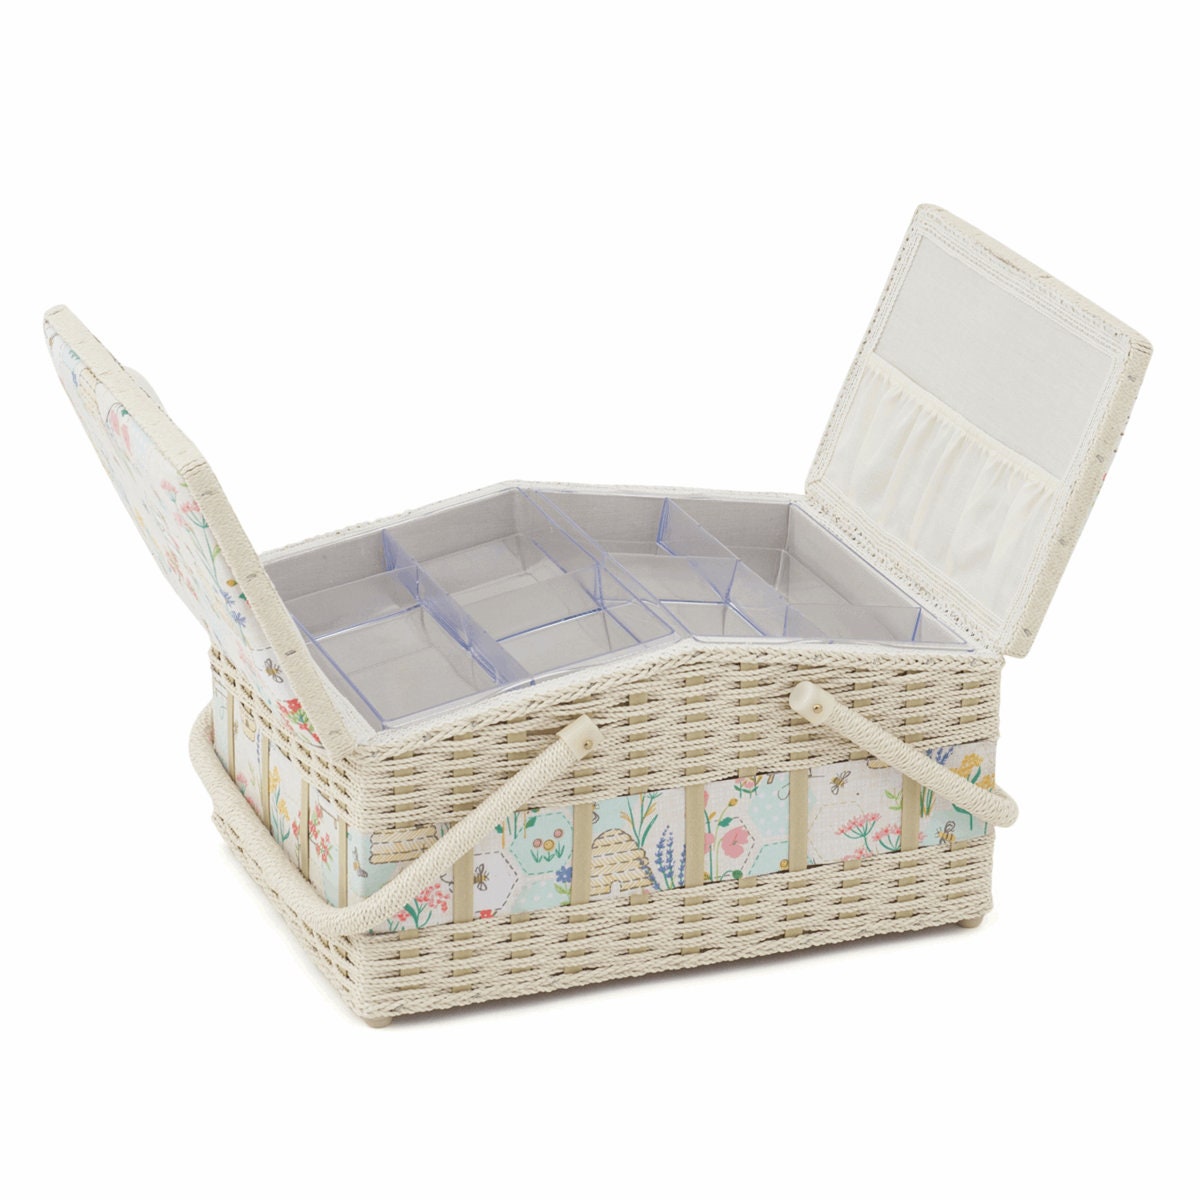 SEWING BASKET BOX STUNNING WICKER LINEN BEE DESIGN LARGE SUPER QUALITY